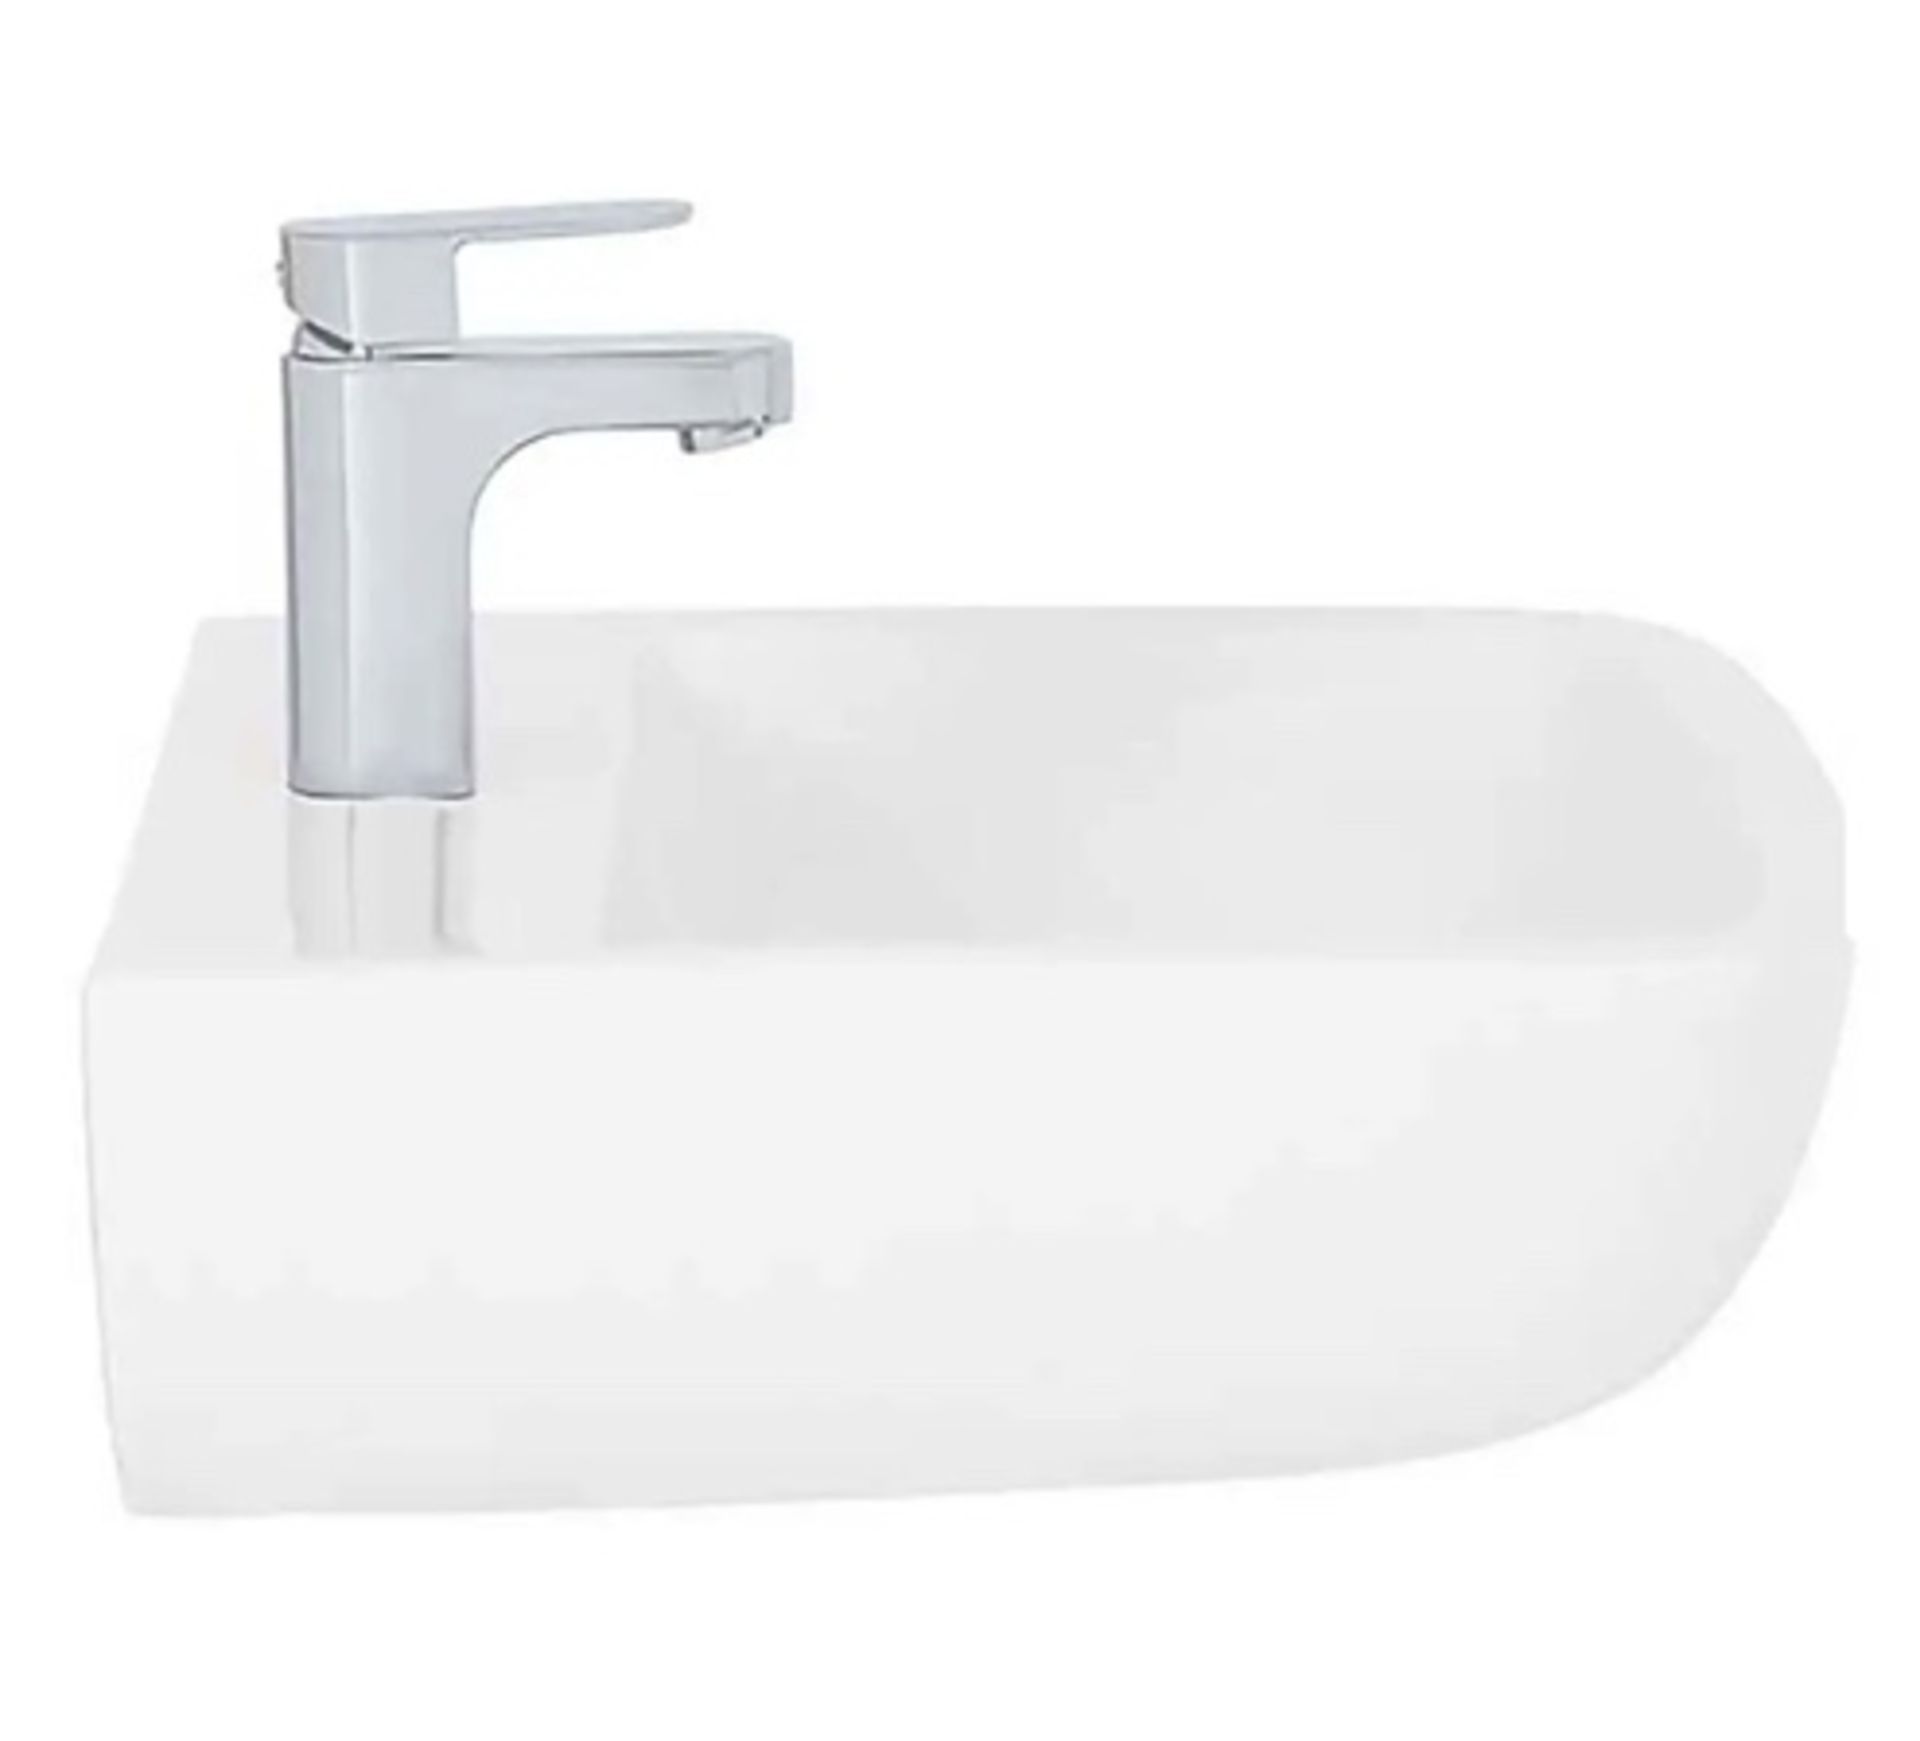 Brand New Boxed Cedar 520mm White Basin with 1 Tap Hole RRP £80 **No Vat**